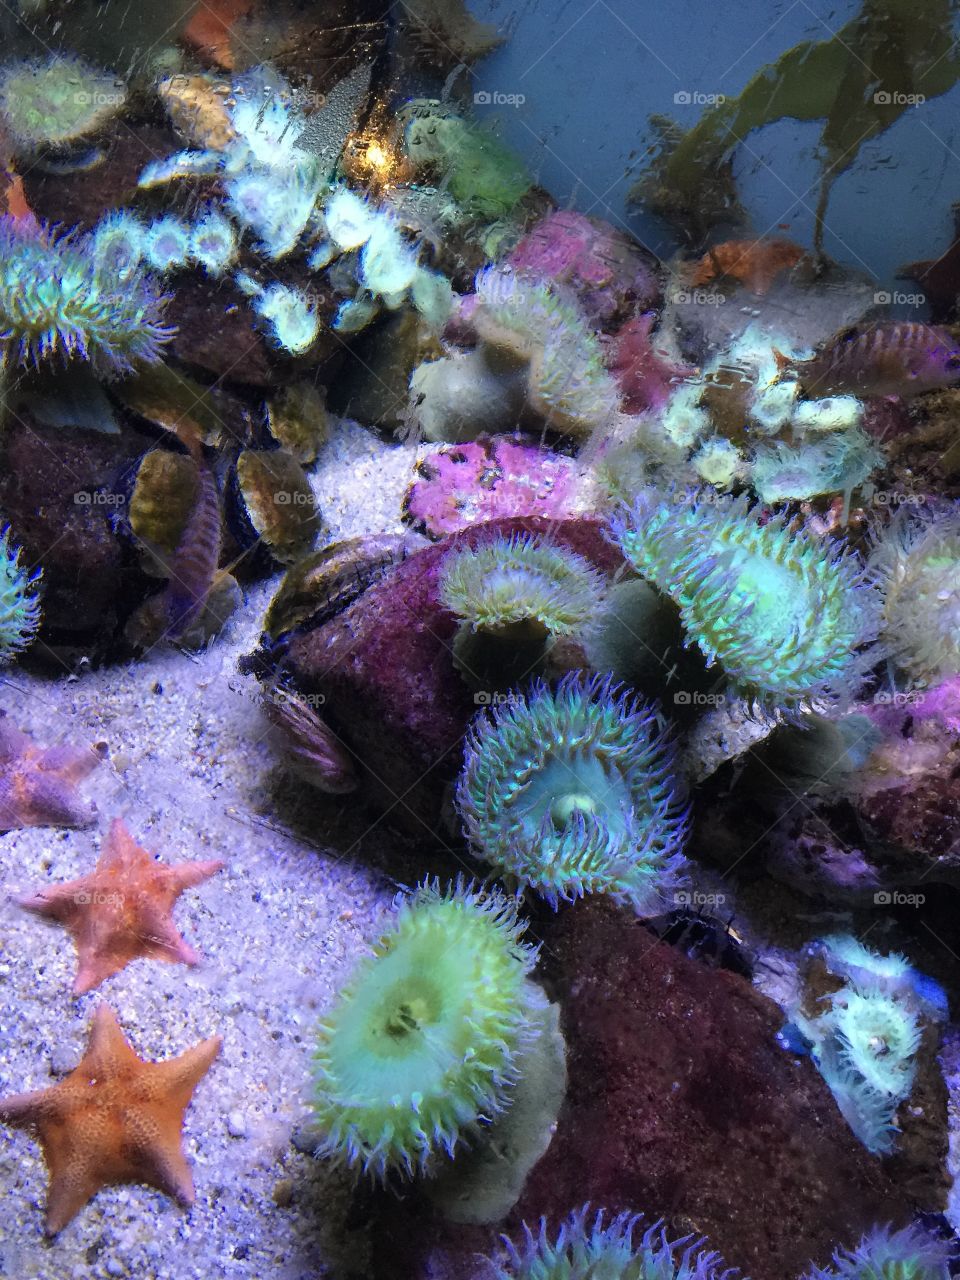 Coral Life